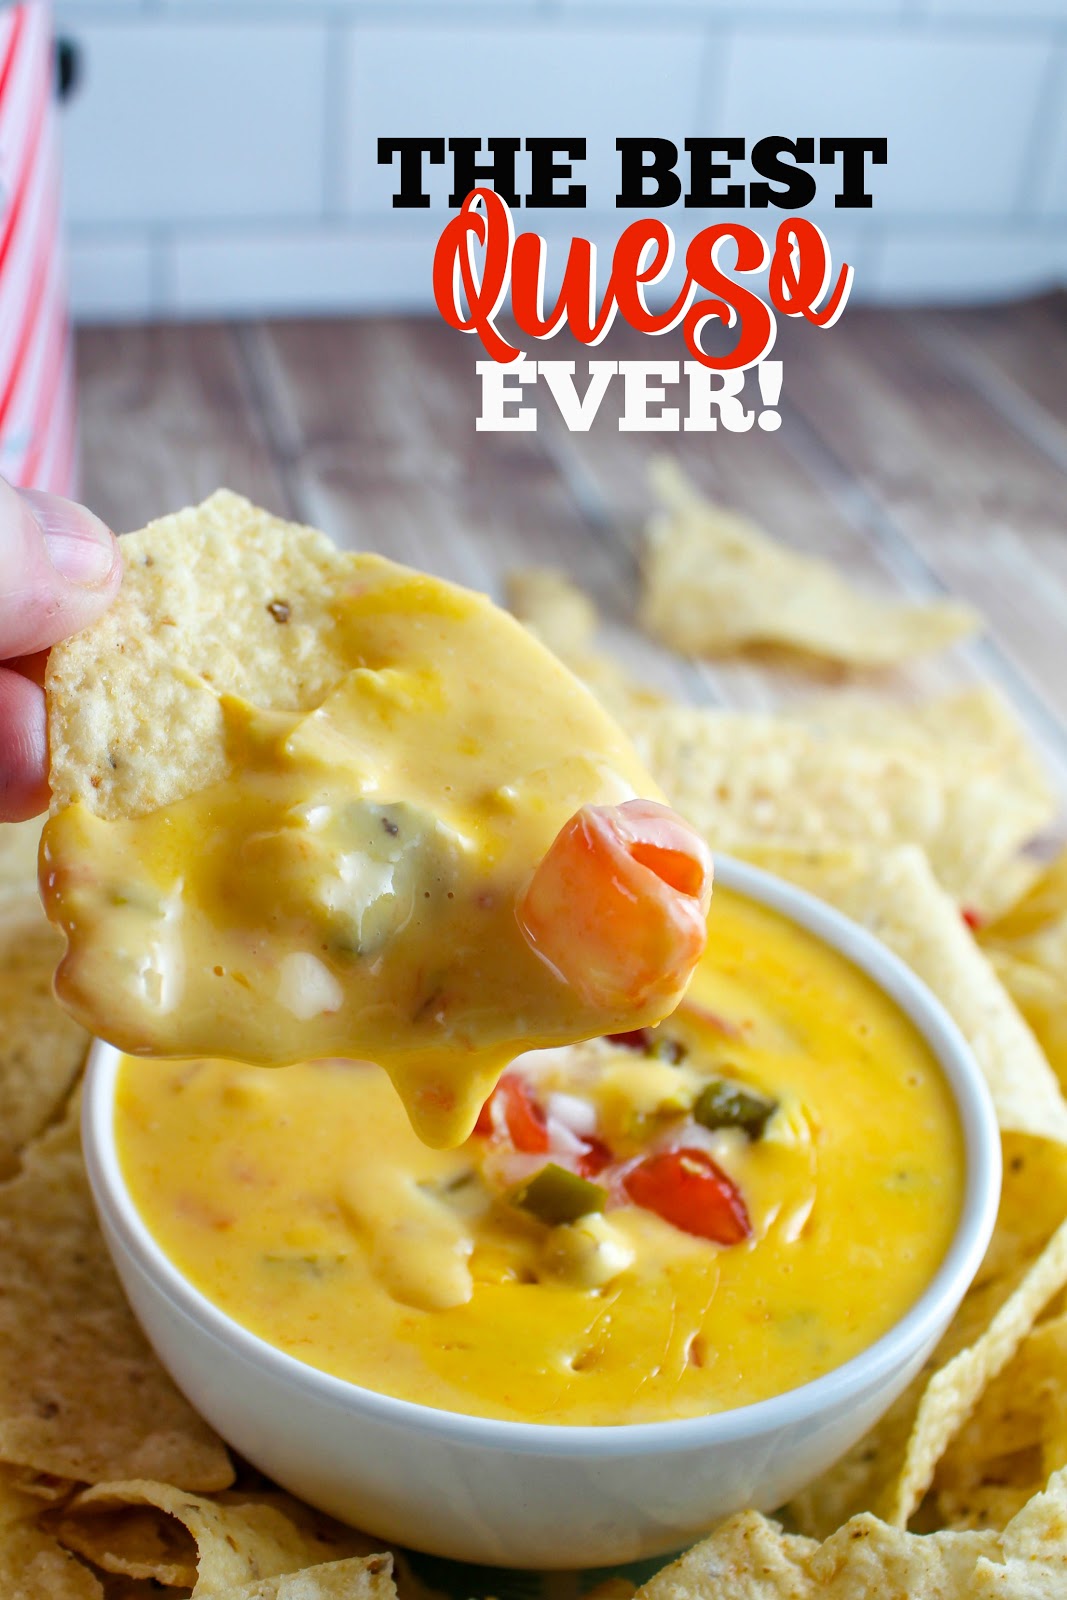 I finally have the actual recipe for my favorite queso on the entire planet! For 15 years, everytime I go home to Iowa - I have made my friends go to Carlos O'Kelly's - just so I can eat this queso. Now - I CAN MAKE IT MYSELF! I had to share!!!